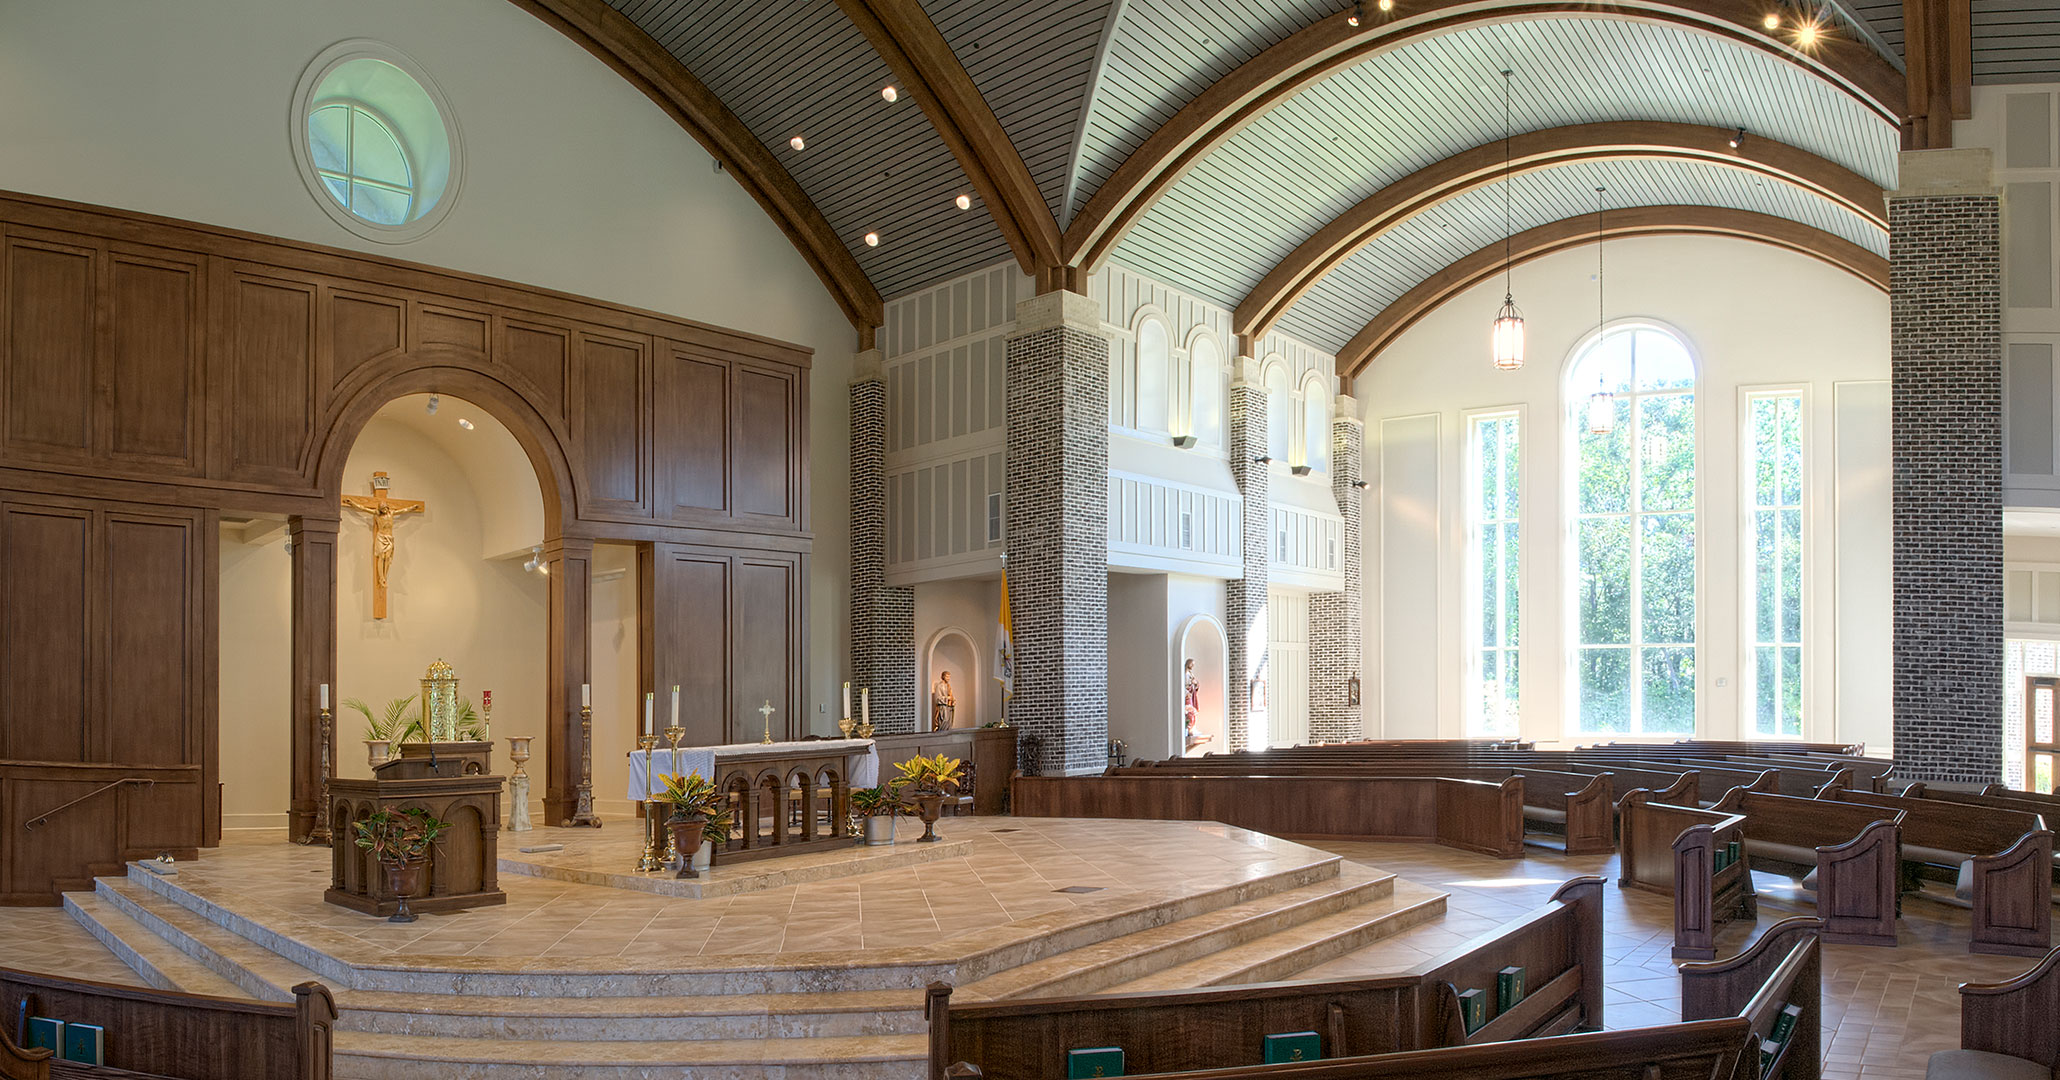 Boudreaux architects designed the interiors for St. Anne in Richmond Hill, GA.